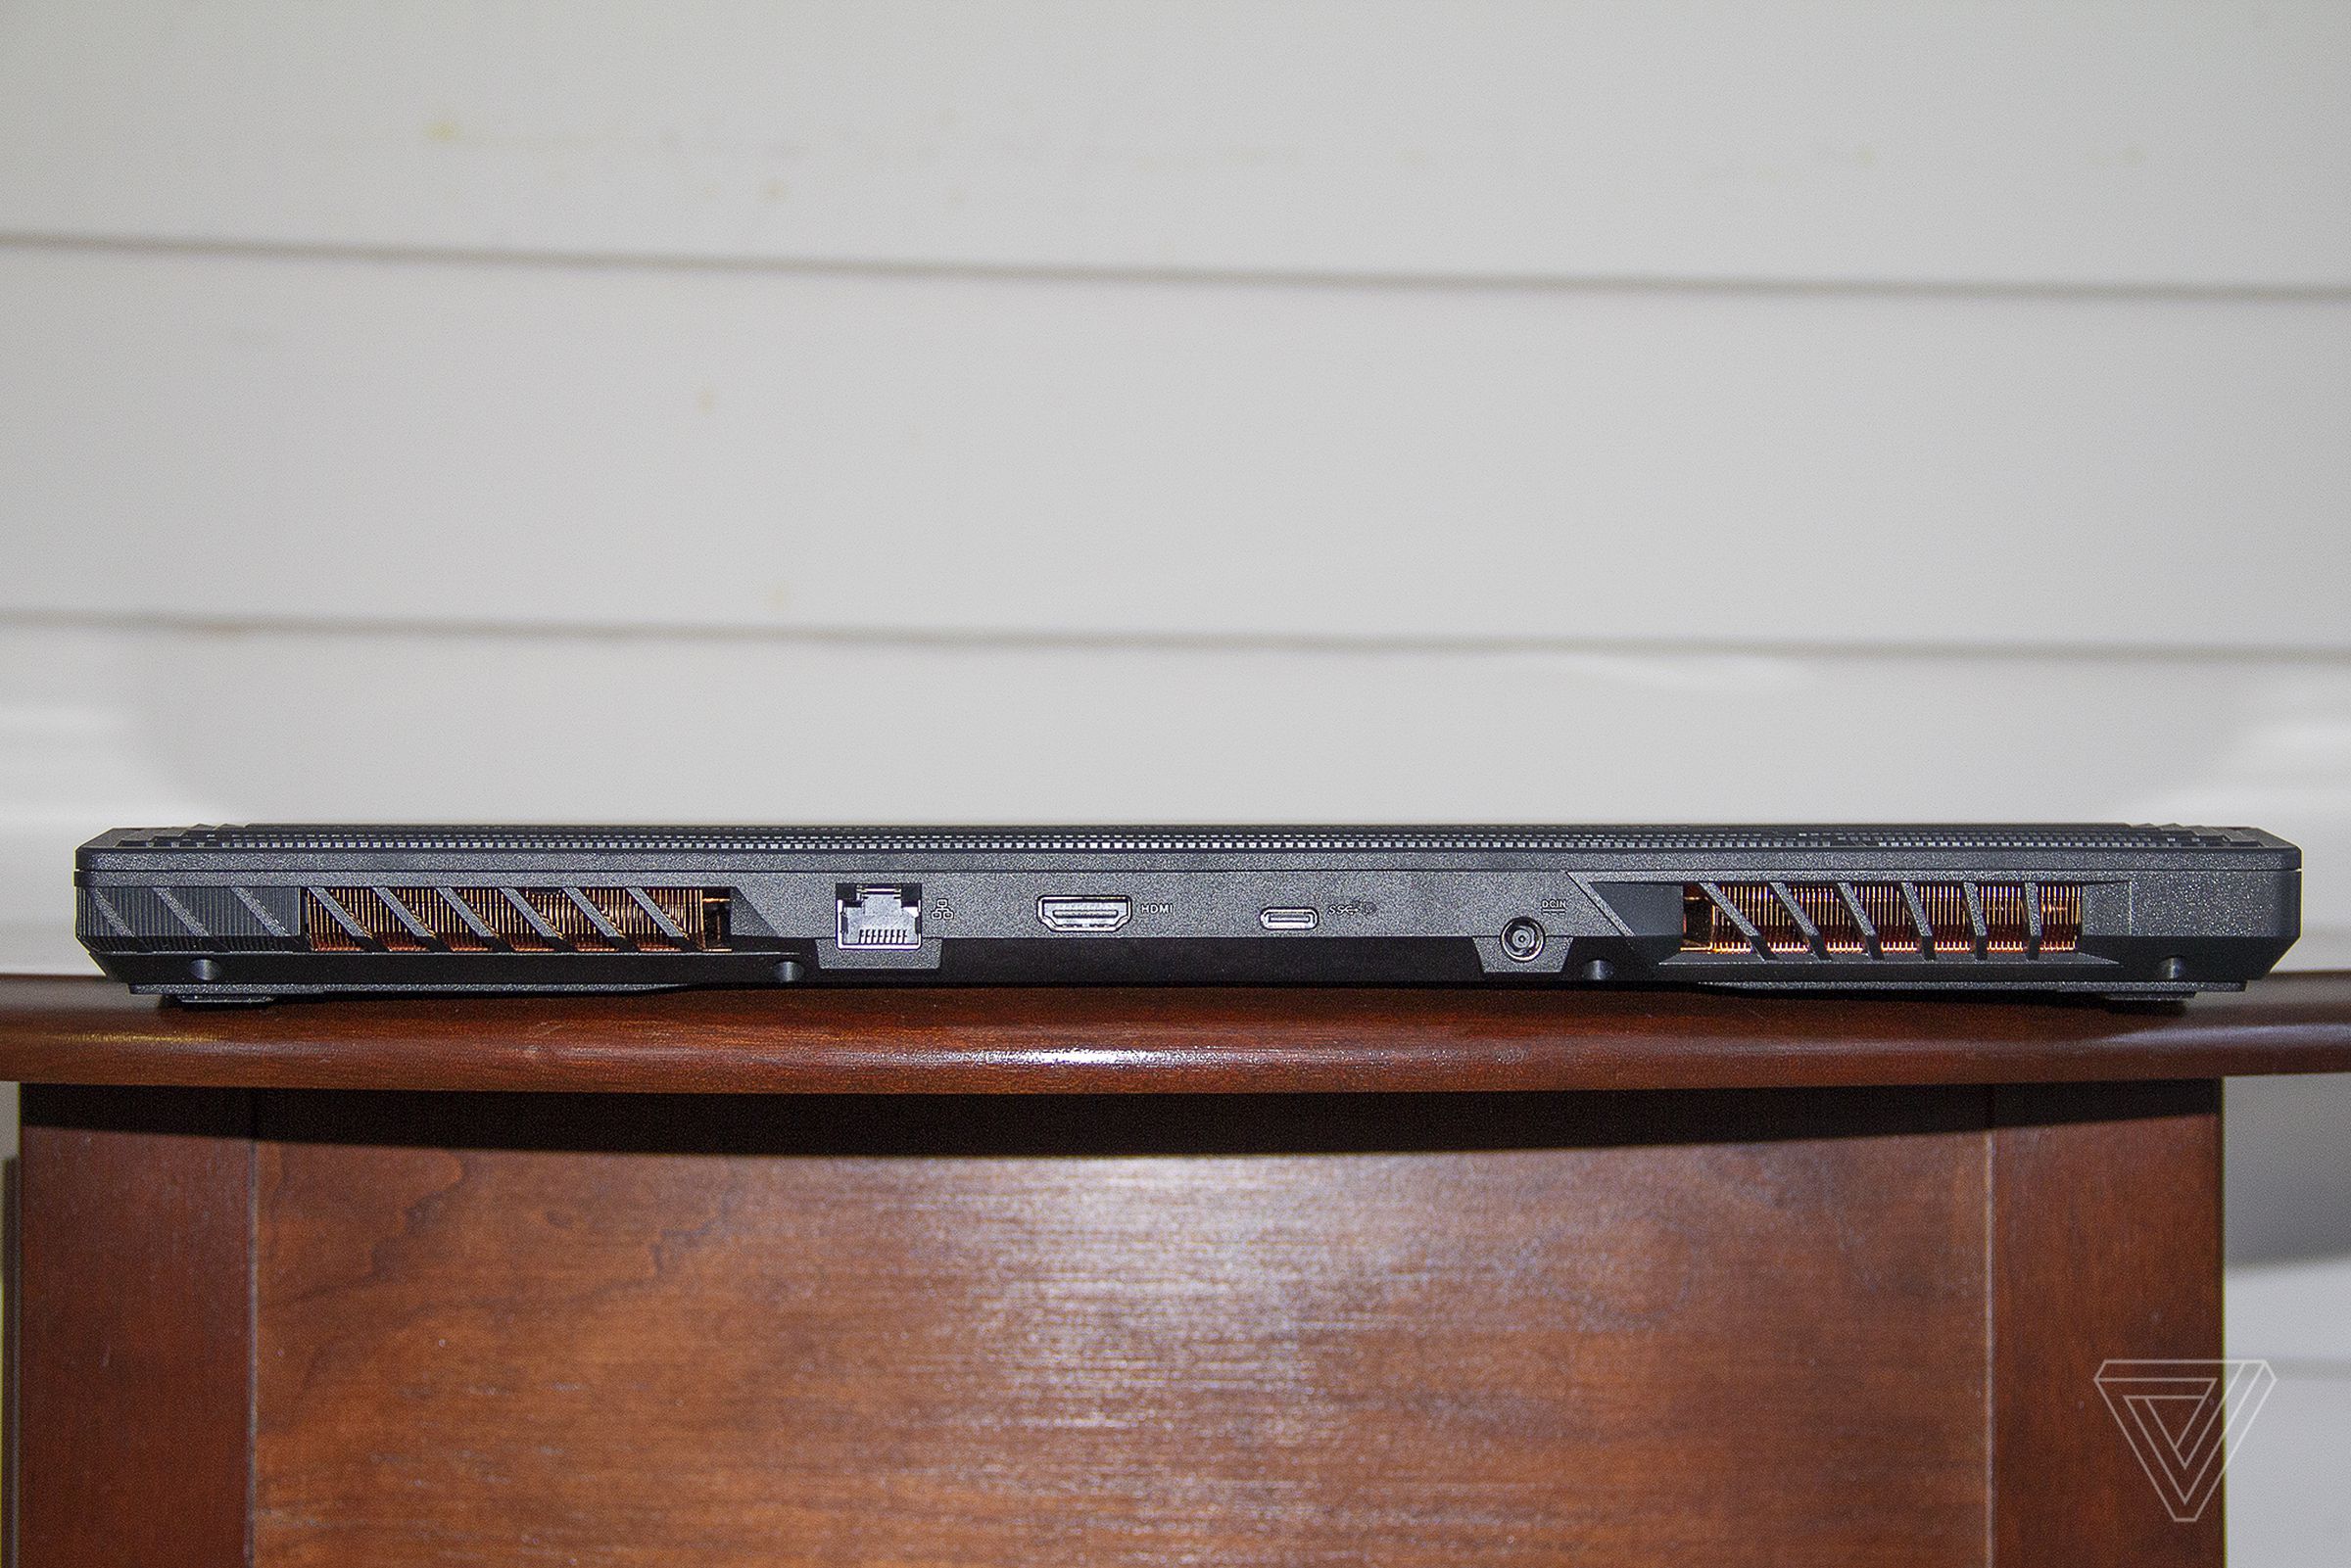 The Asus ROG Strix Scar 15 from the back.